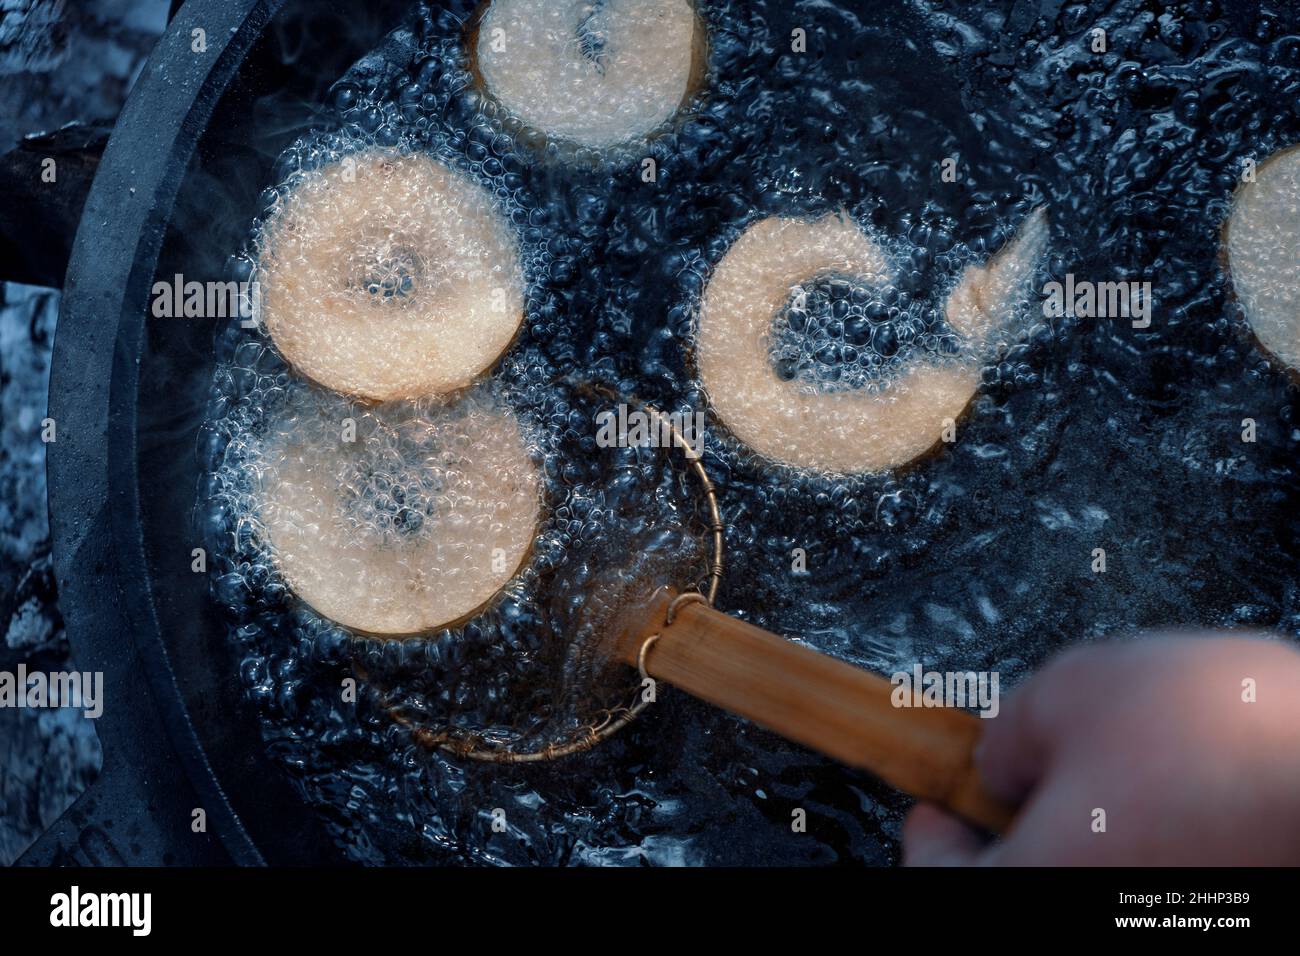 Homemade donuts frying in cast iron skillet outdoors at campsite. Stock Photo